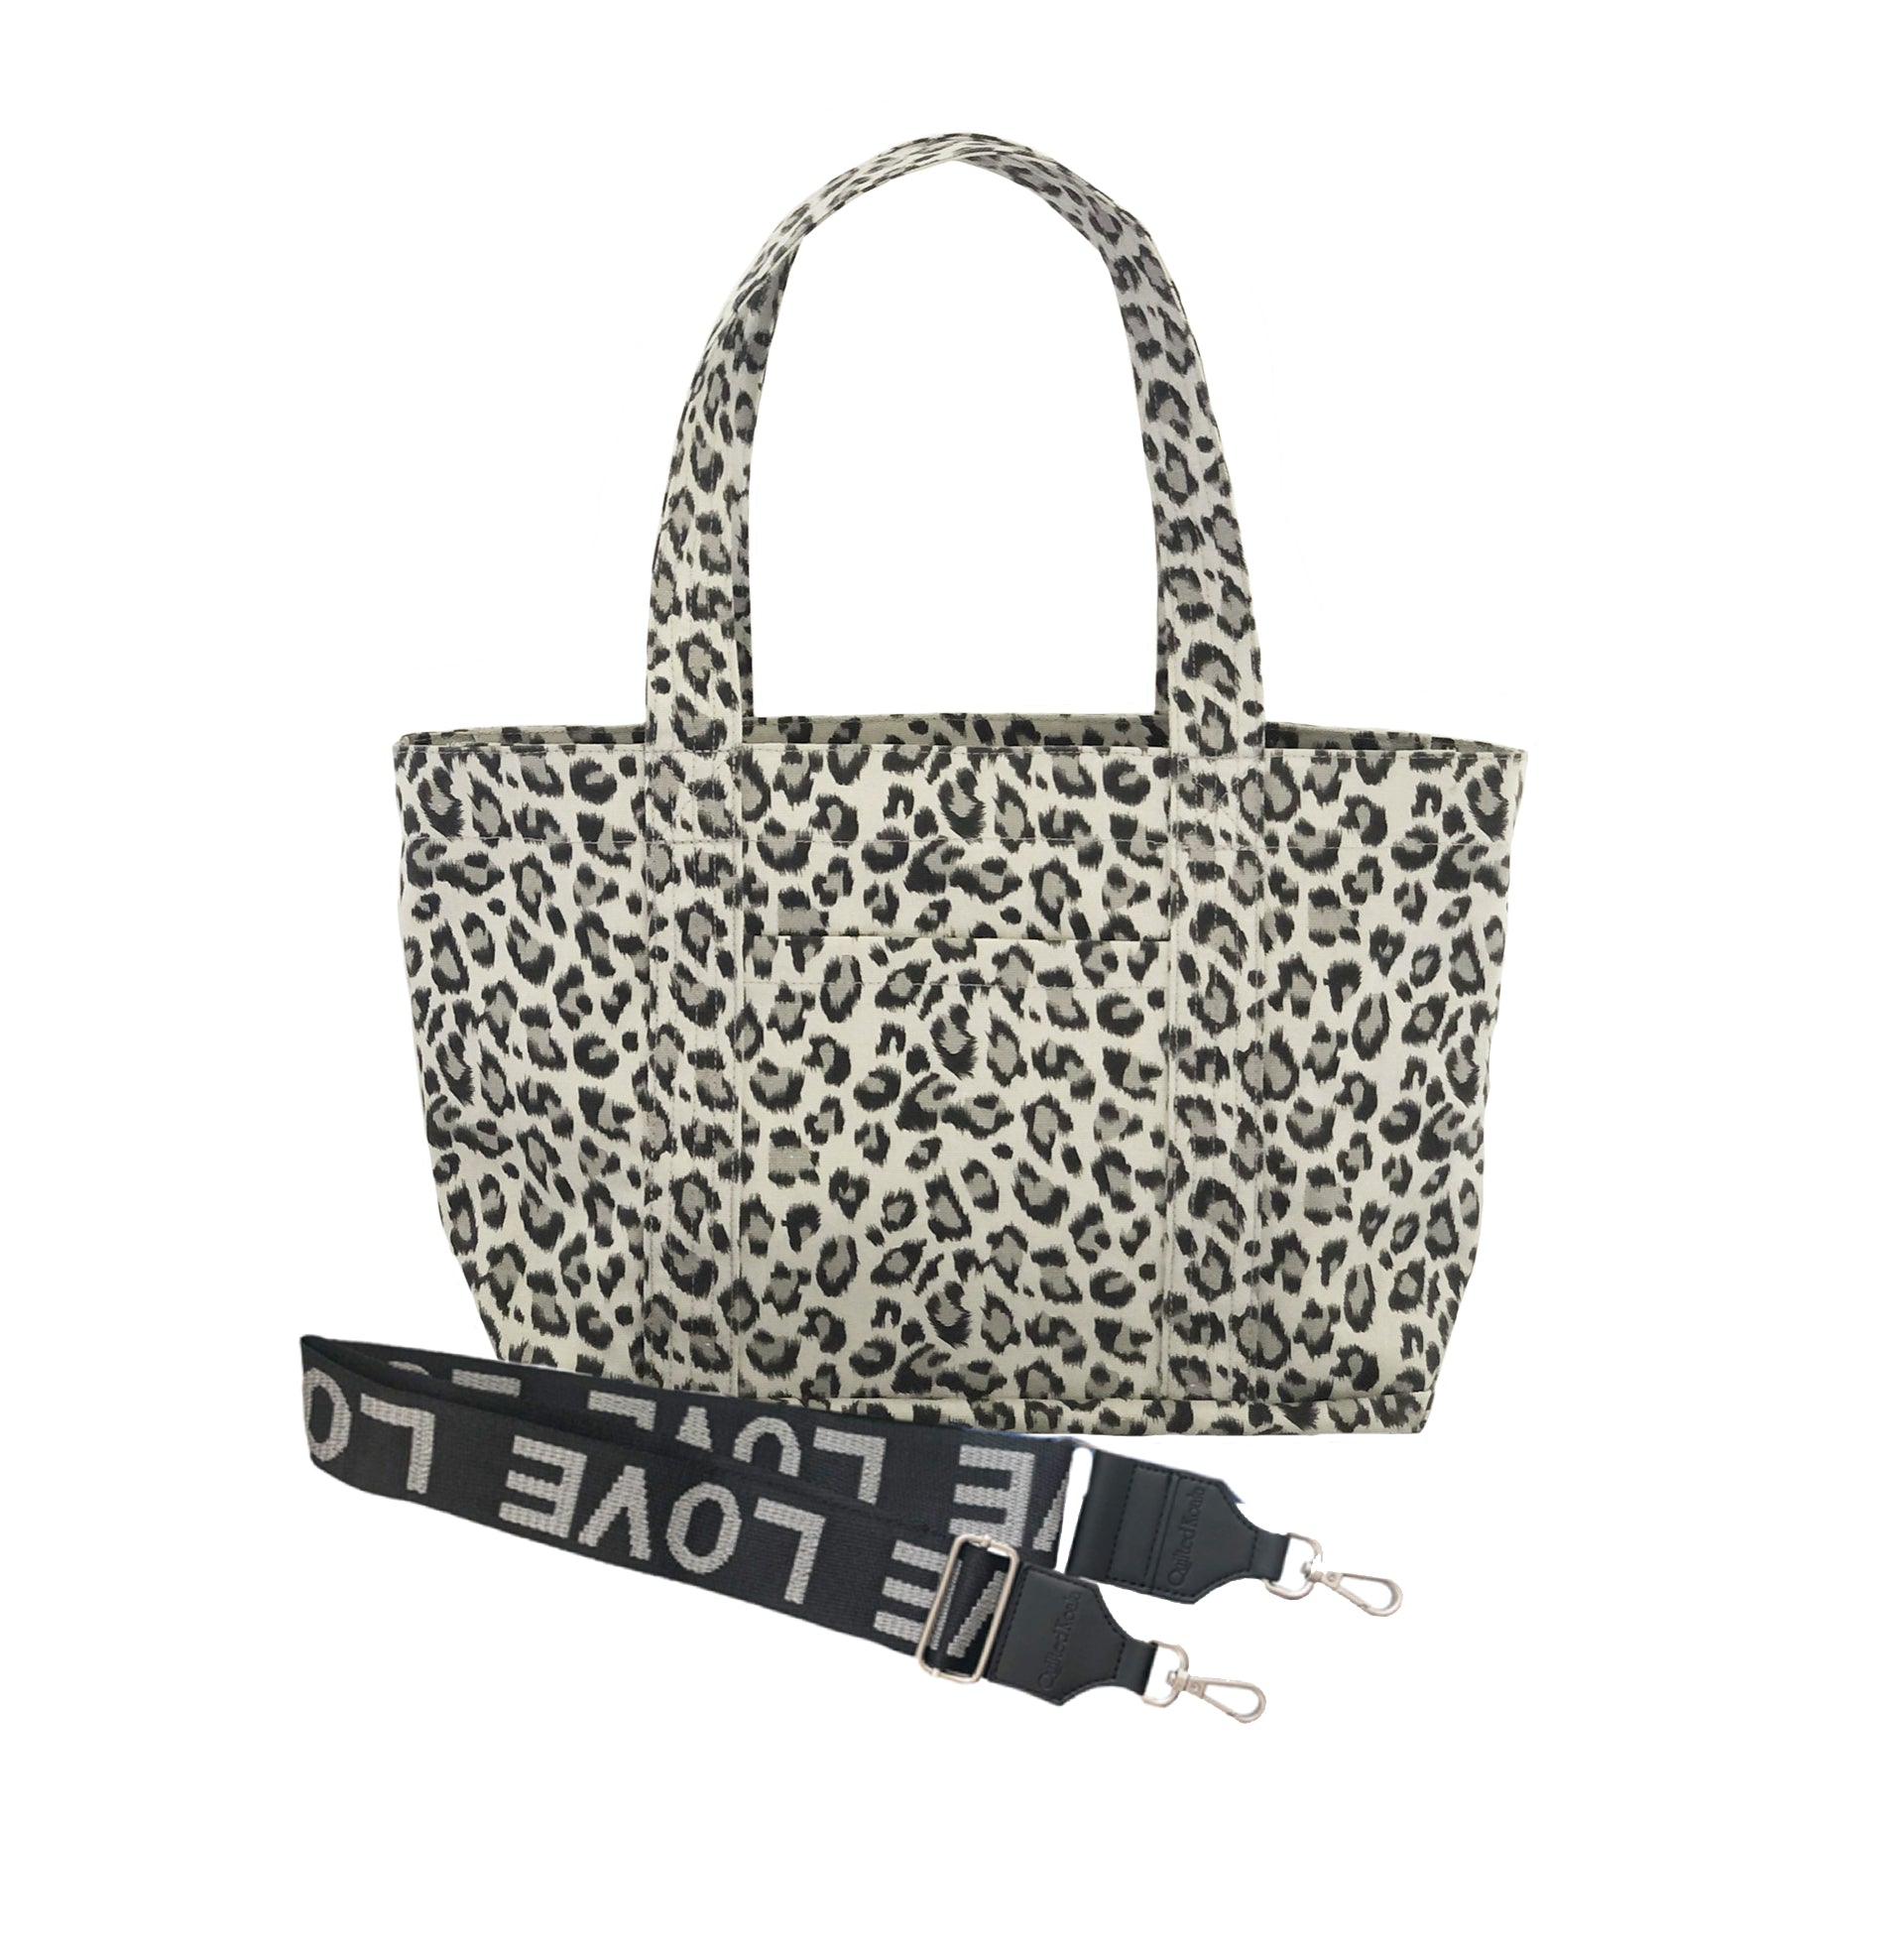 Monogram Stripe - Midi Zipper Tote: Leopard Just $78 with FREE LUXE STRAP - Quilted Koala